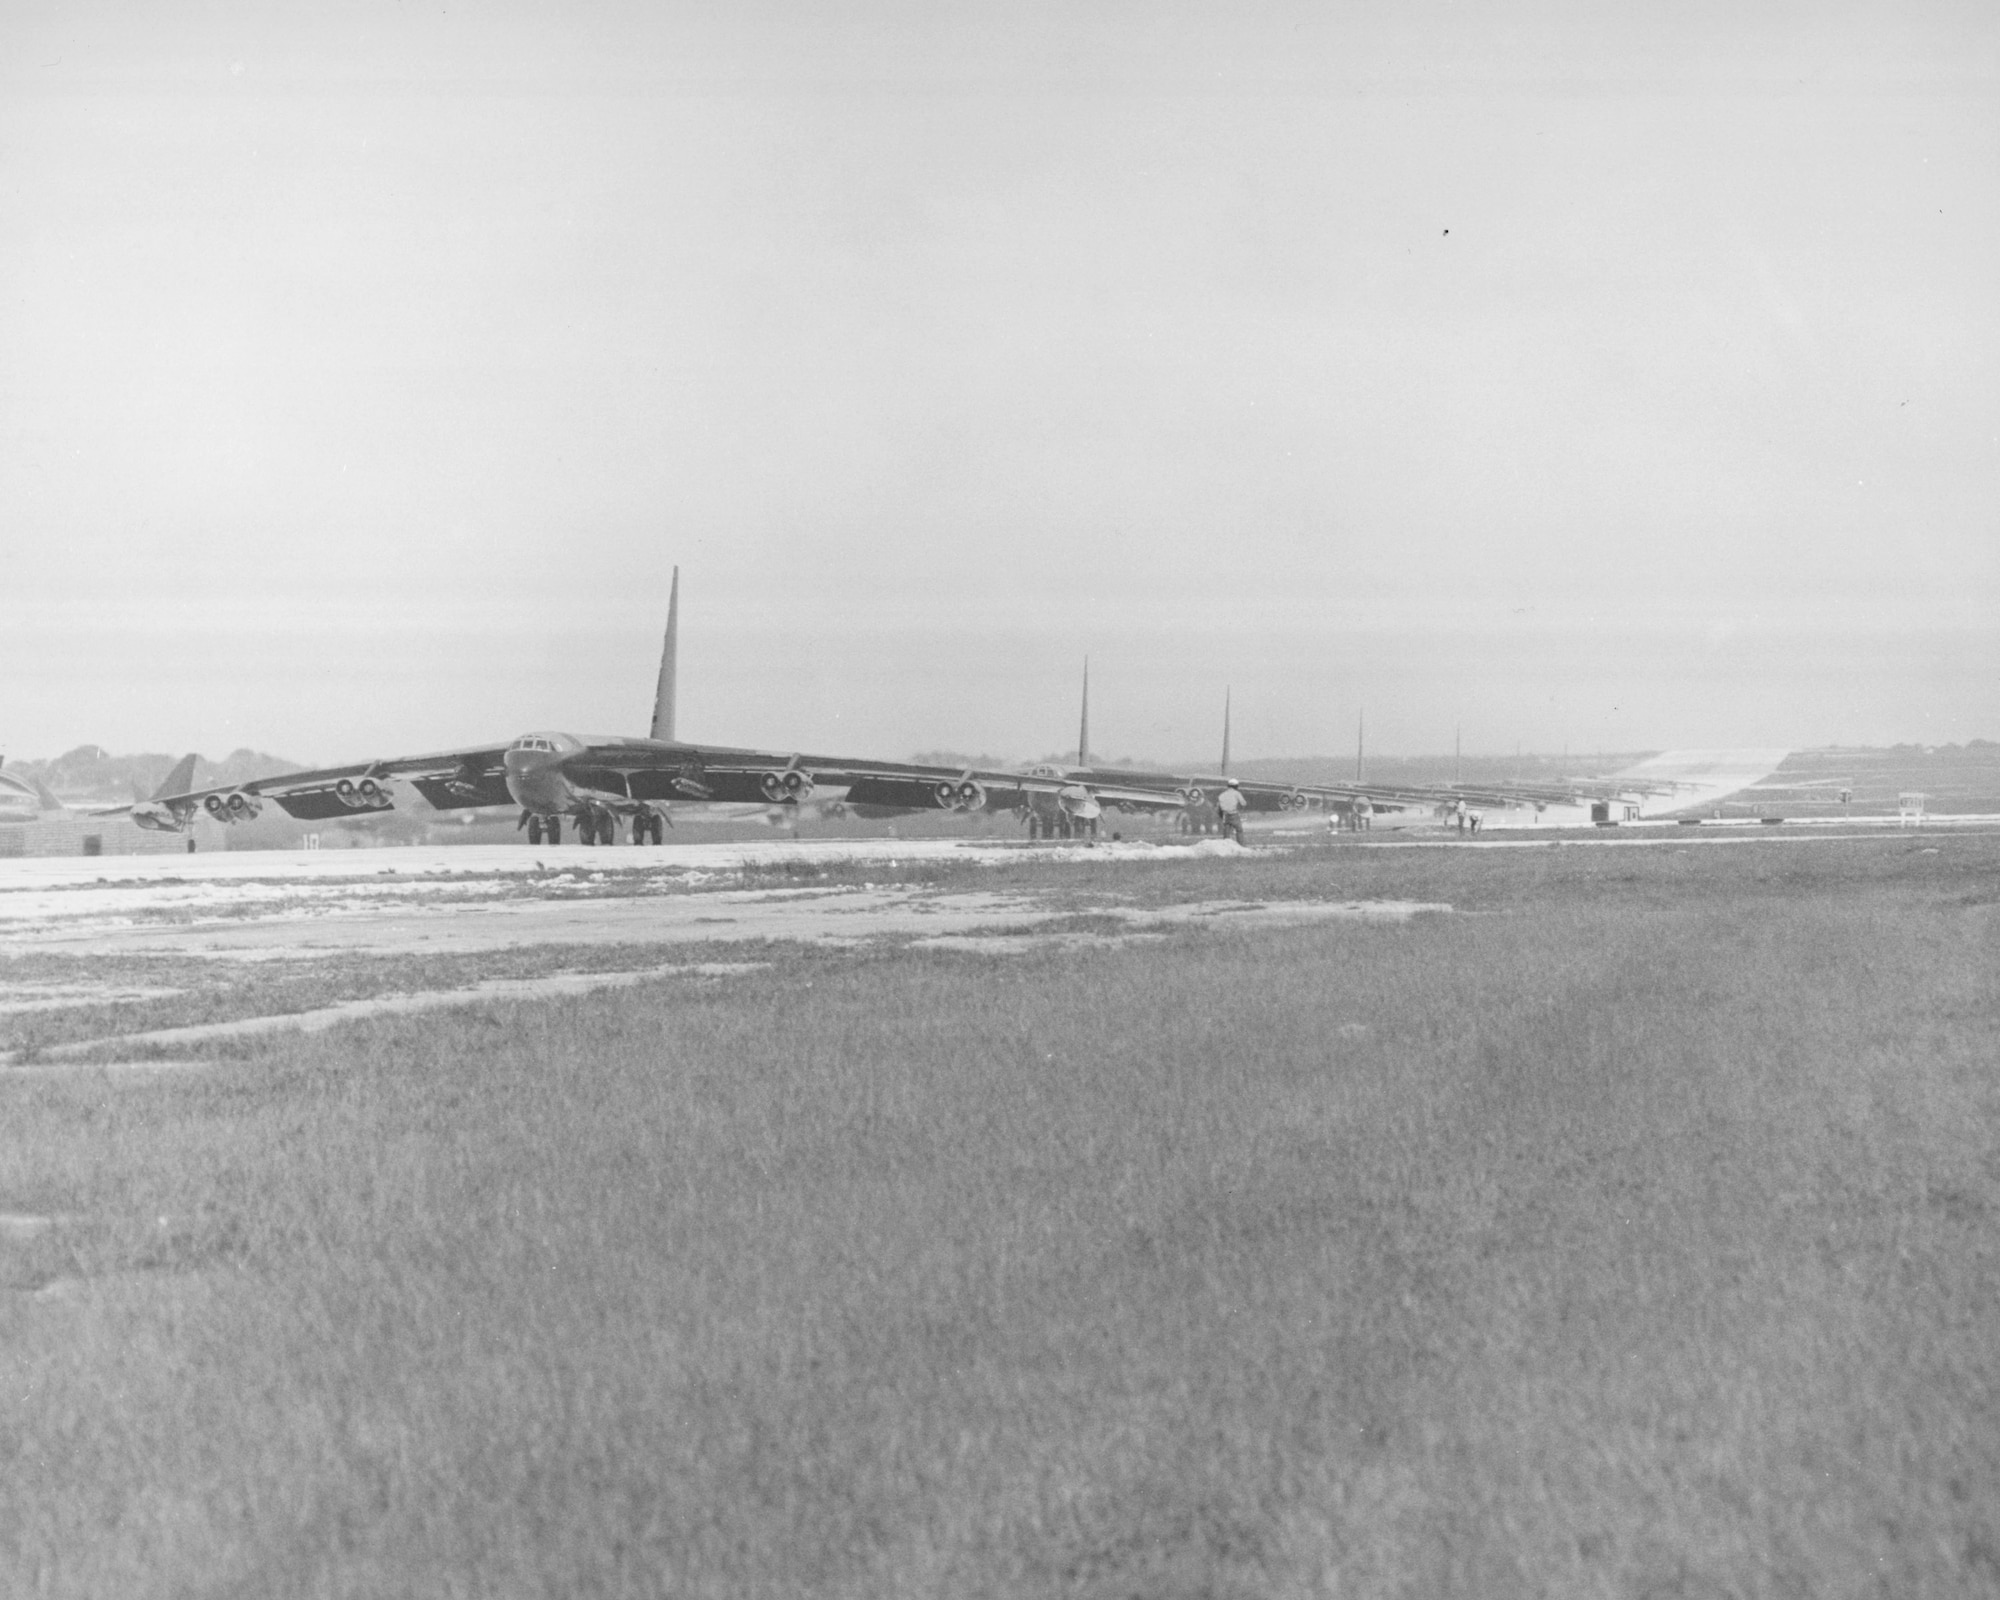 B-52s prepare to take off from Andersen Air Base, Guam, for missions in Operation Linebacker II in Dec. 1972. (Courtesy Photo)